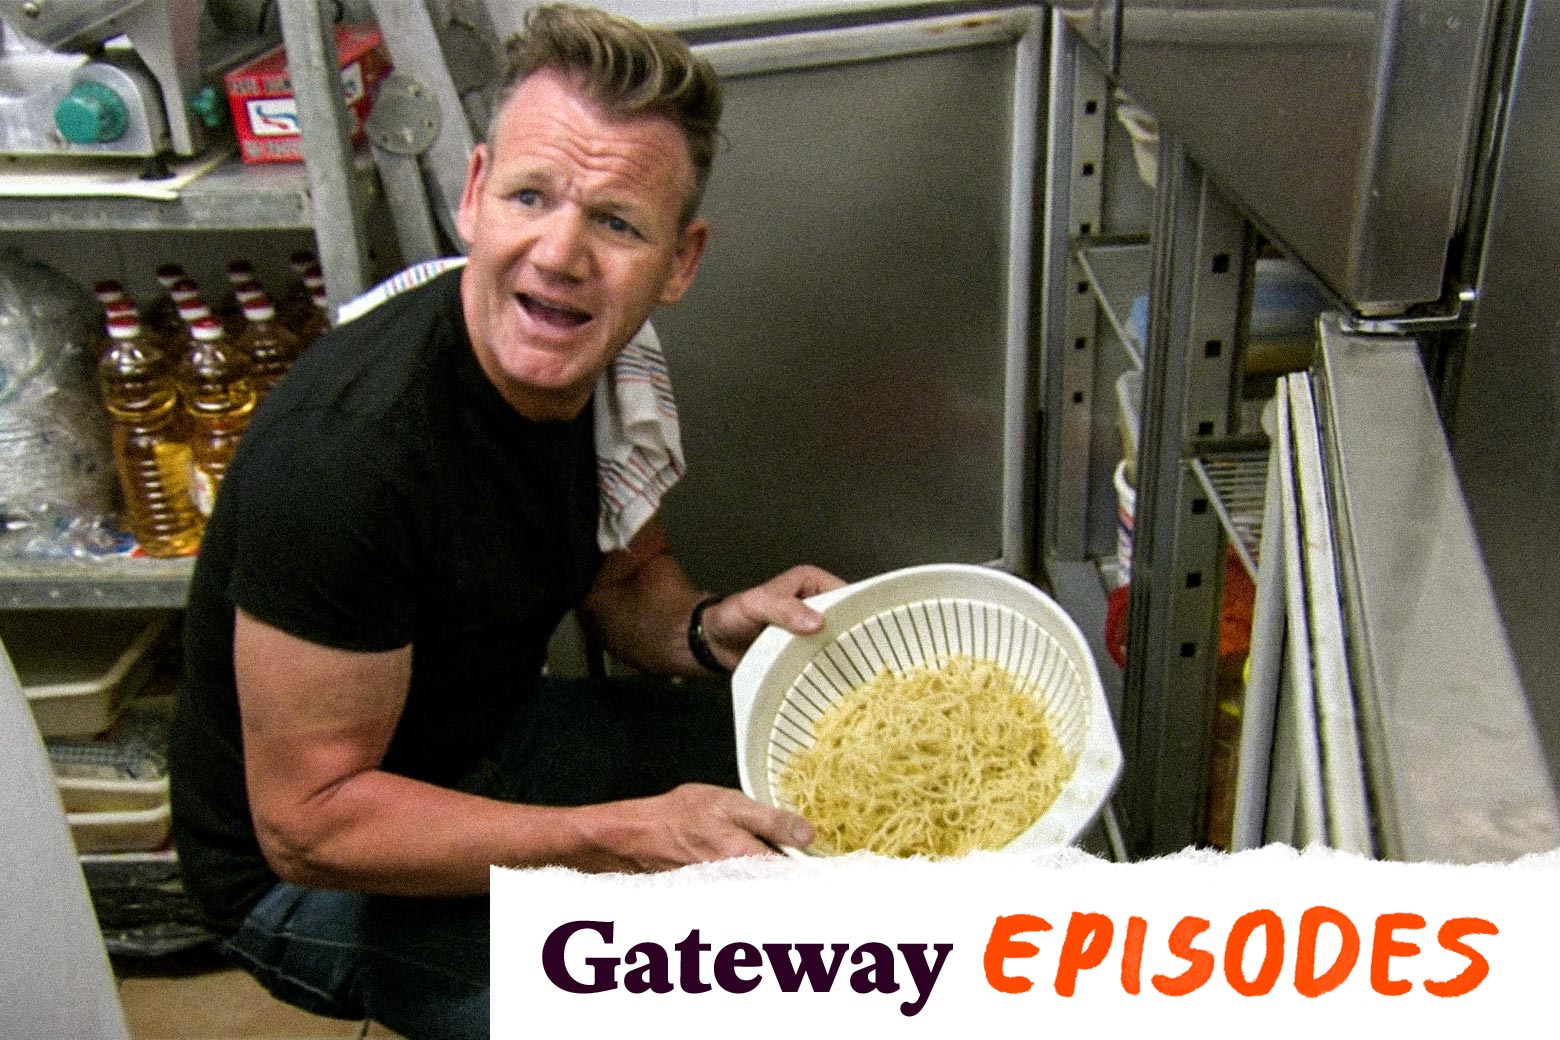 A perturbed-looking Gordon Ramsay holds a strainer of pasta as he squats in a stainless steel pantry. In the lower right corner, a tearaway label reads: "Gateway Episodes."